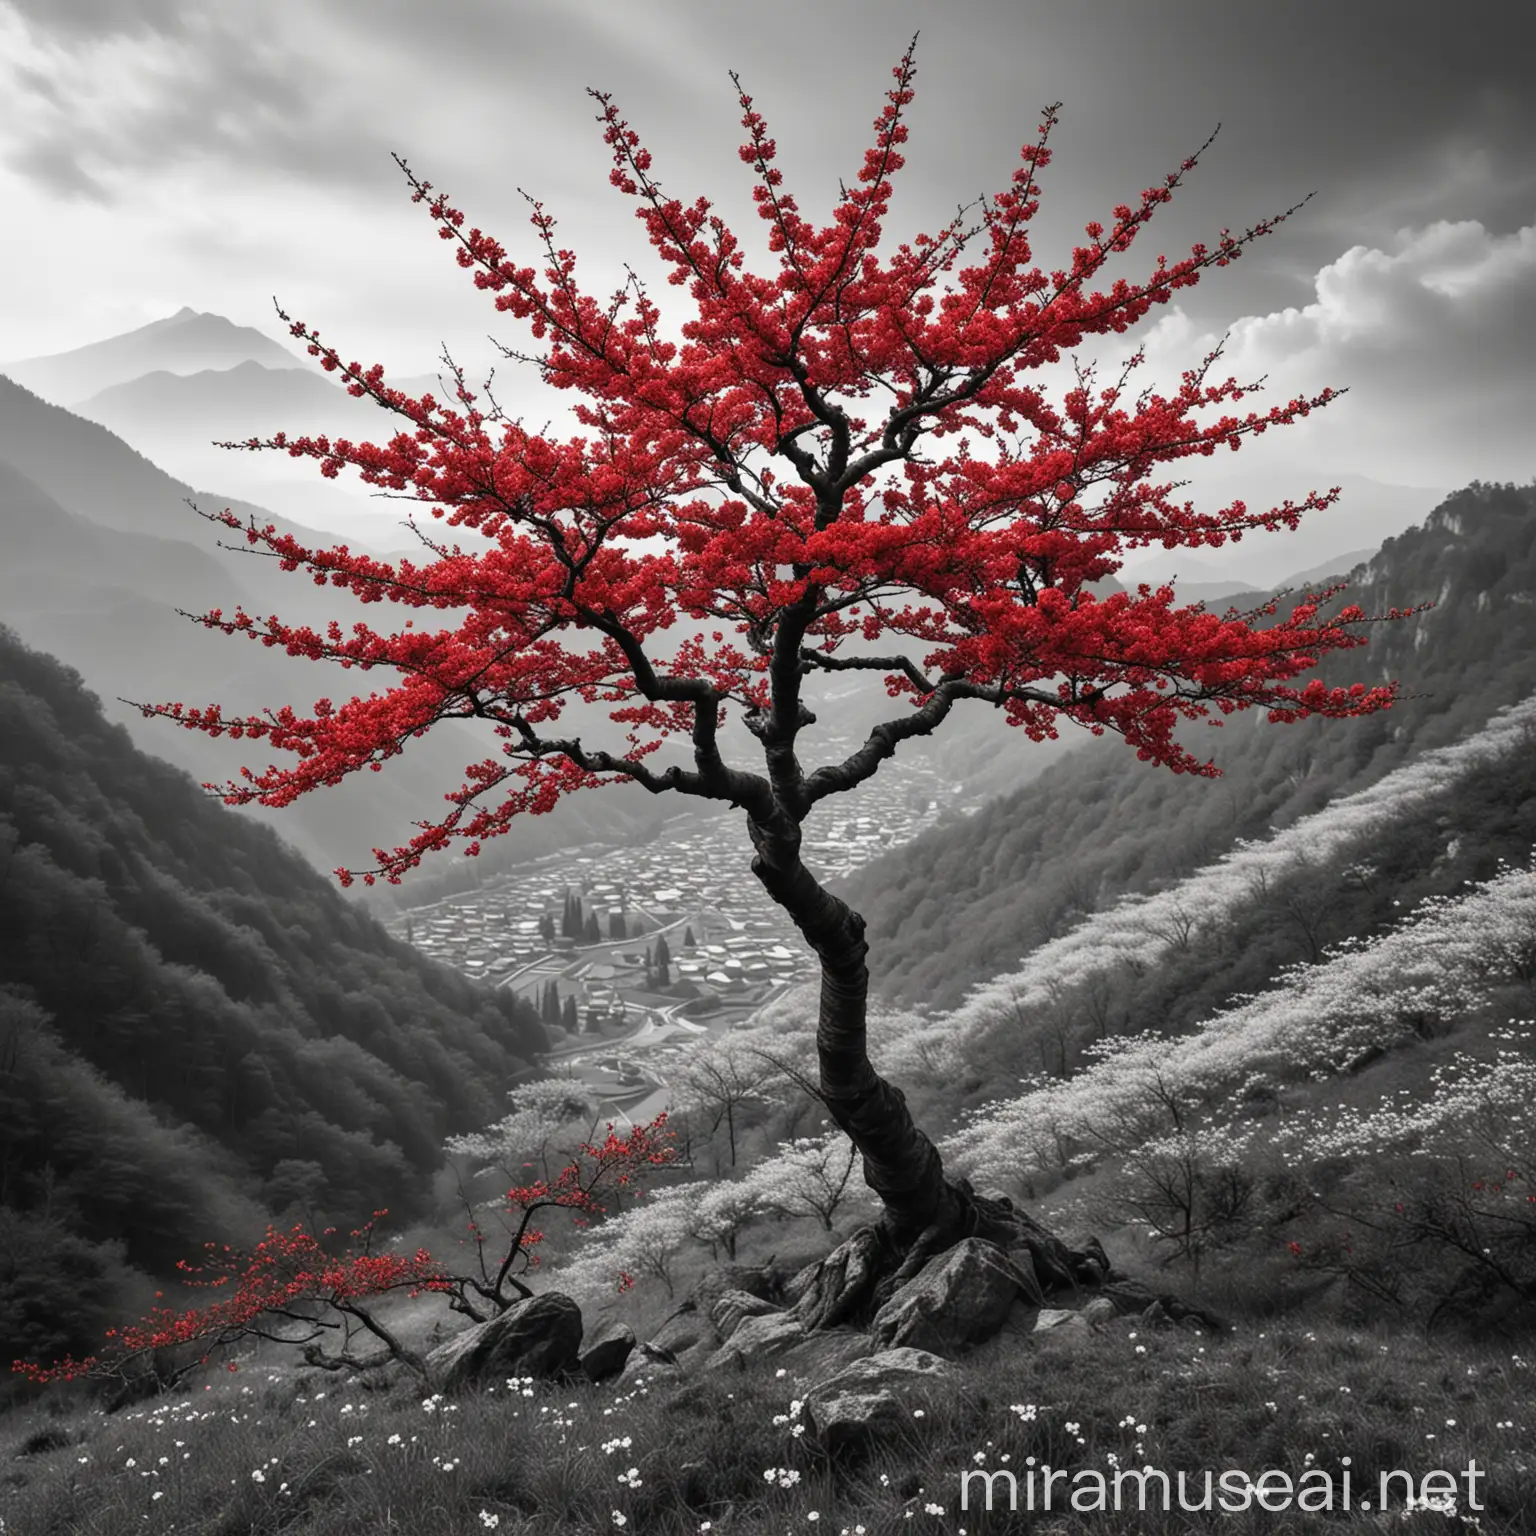 Red Cherry Blossom Tree in Greyscale Mountain Valley